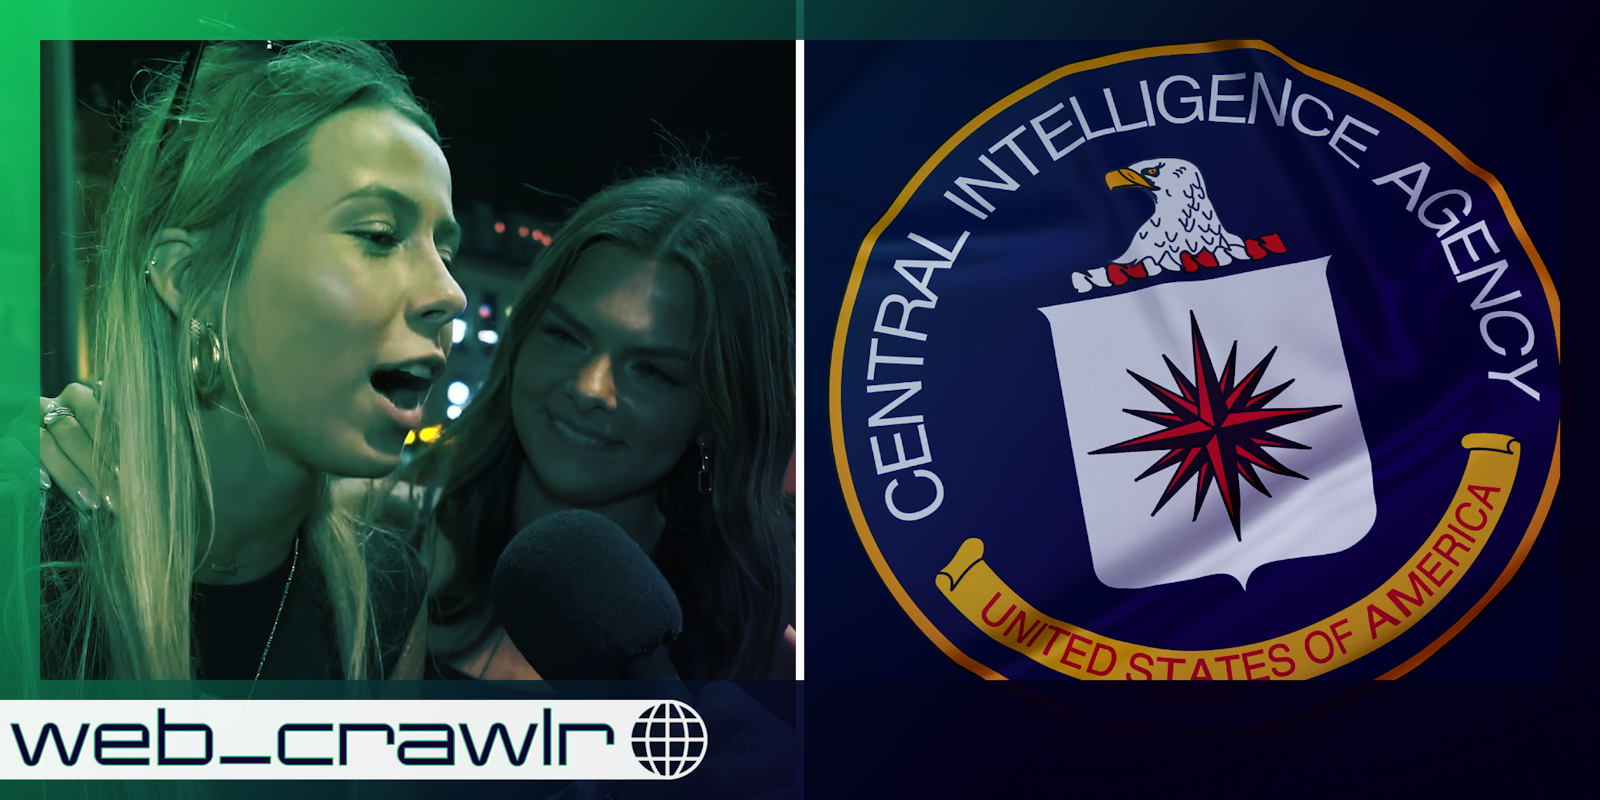 The Hawk Tuah girl meme next to a CIA insignia. The Daily Dot newsletter web_crawlr logo is in the bottom left corner.